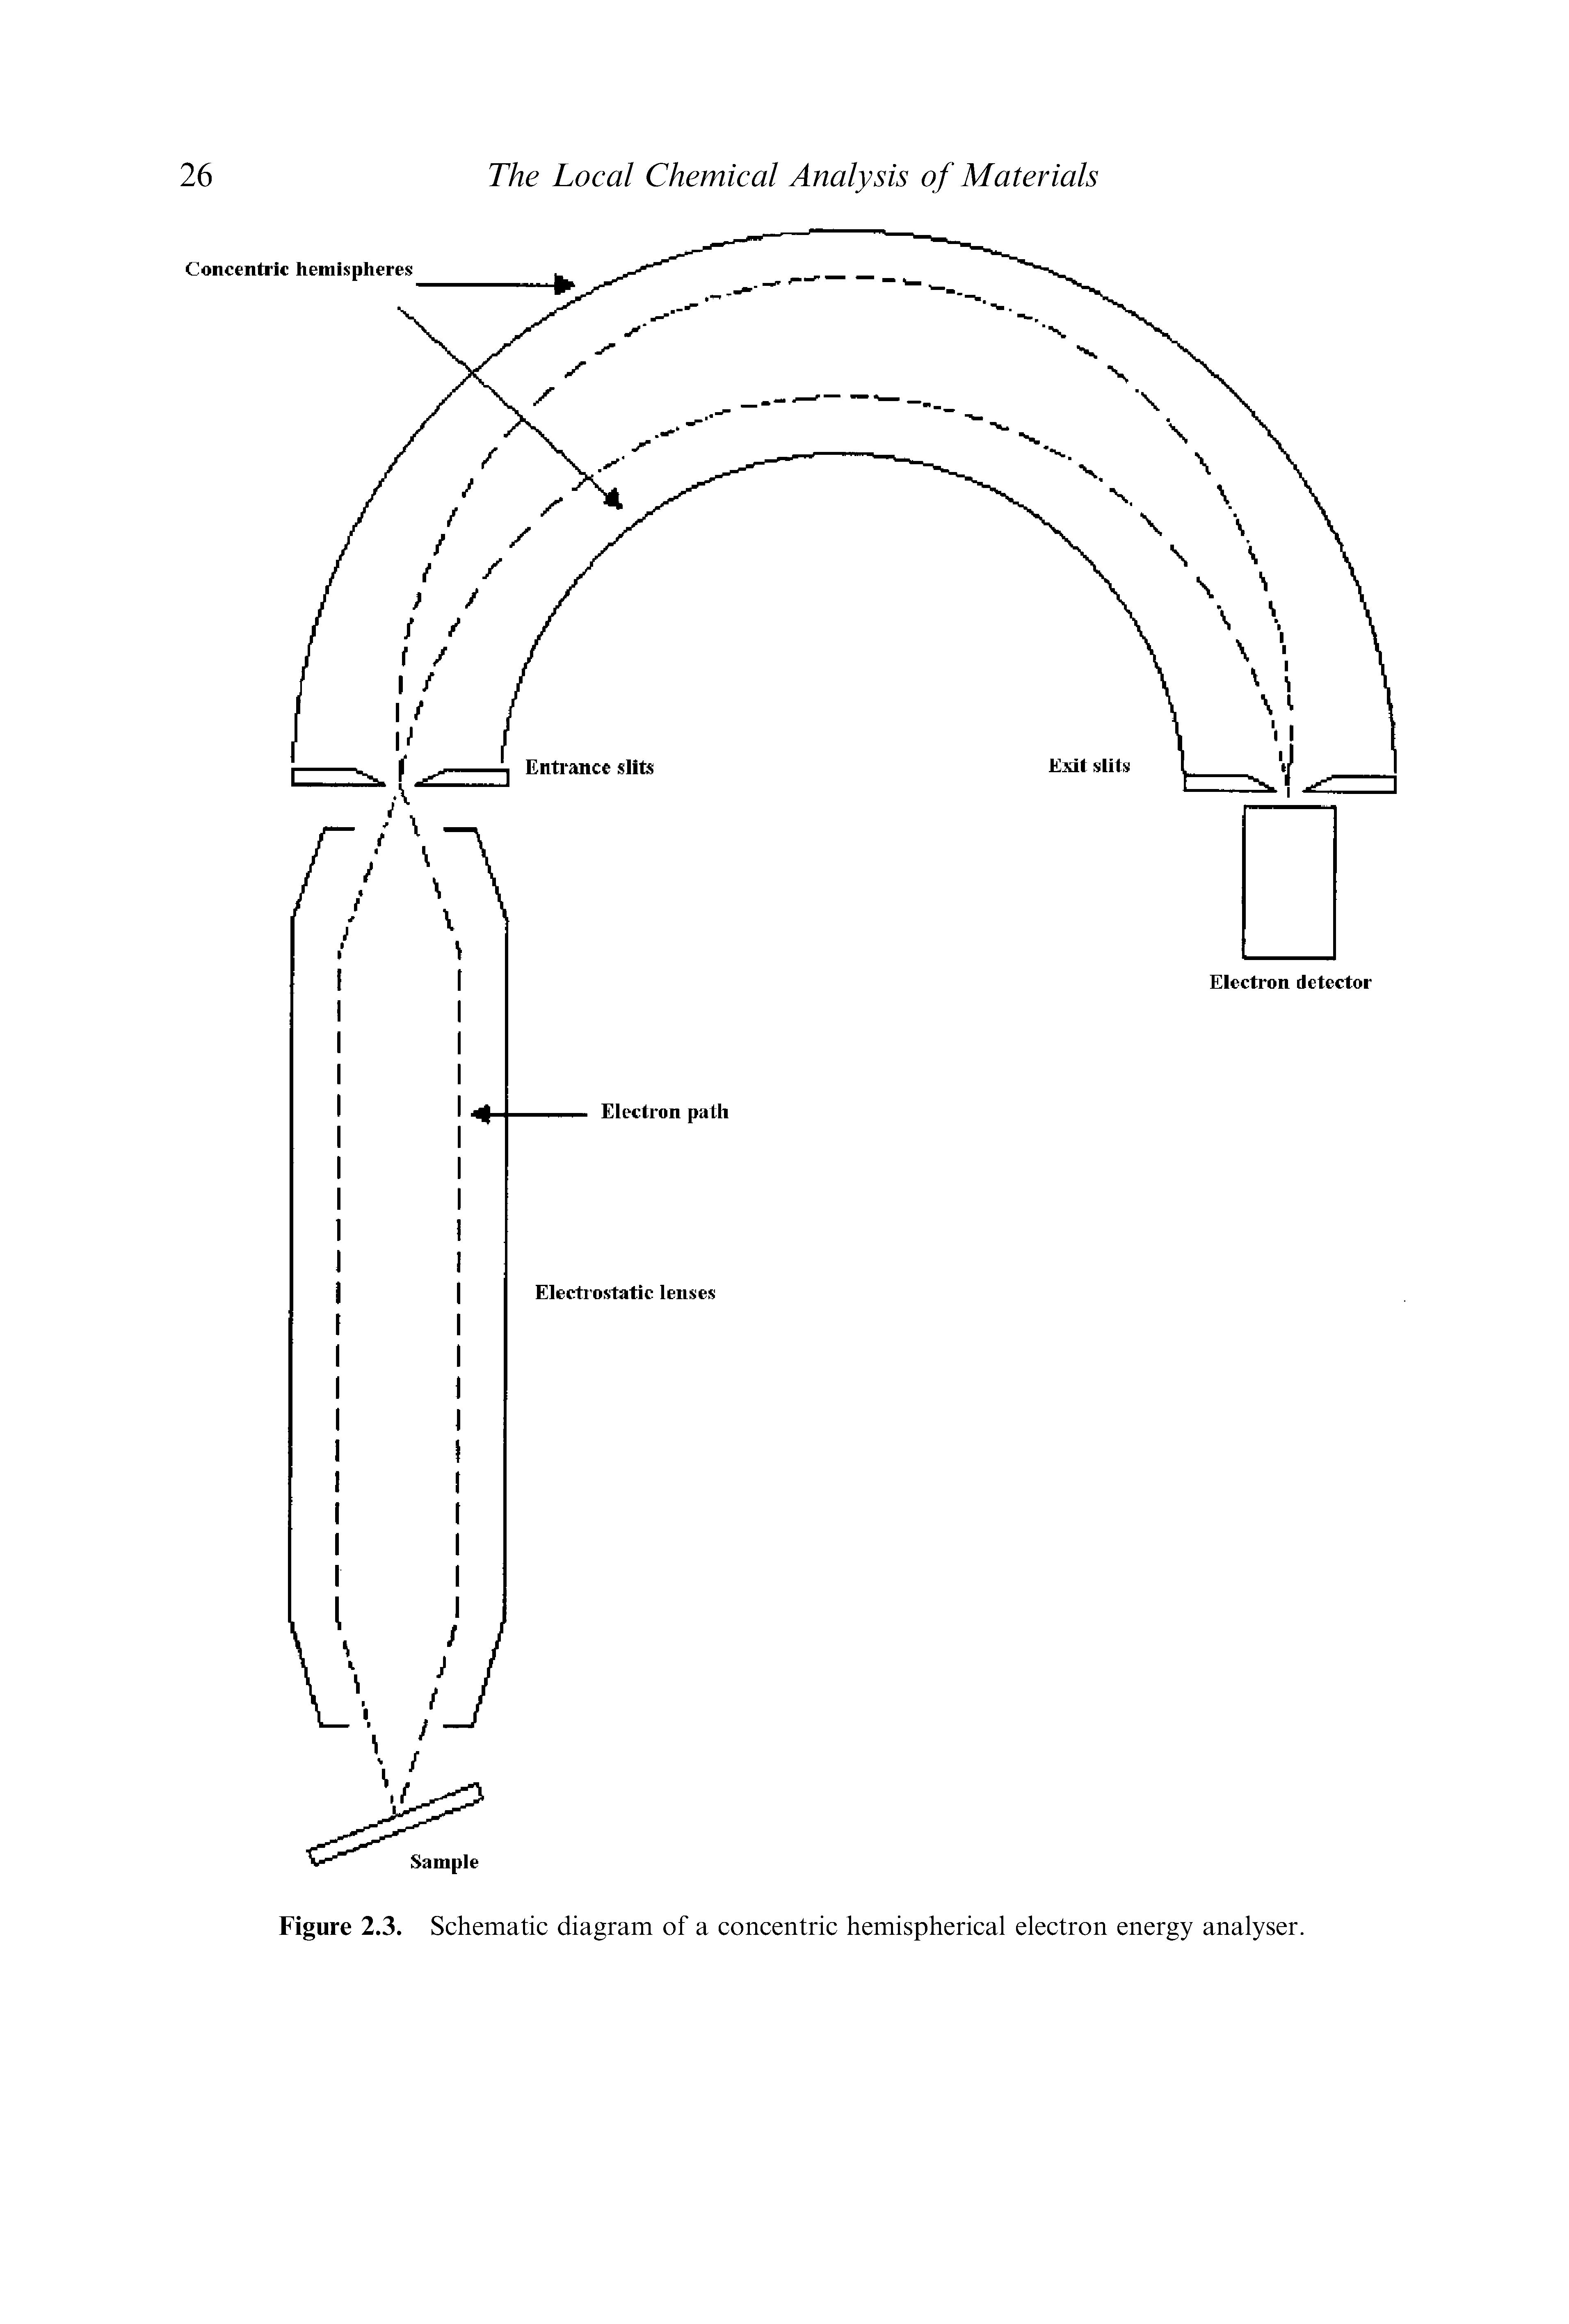 Figure 2.3. Schematic diagram of a concentric hemispherical electron energy analyser.